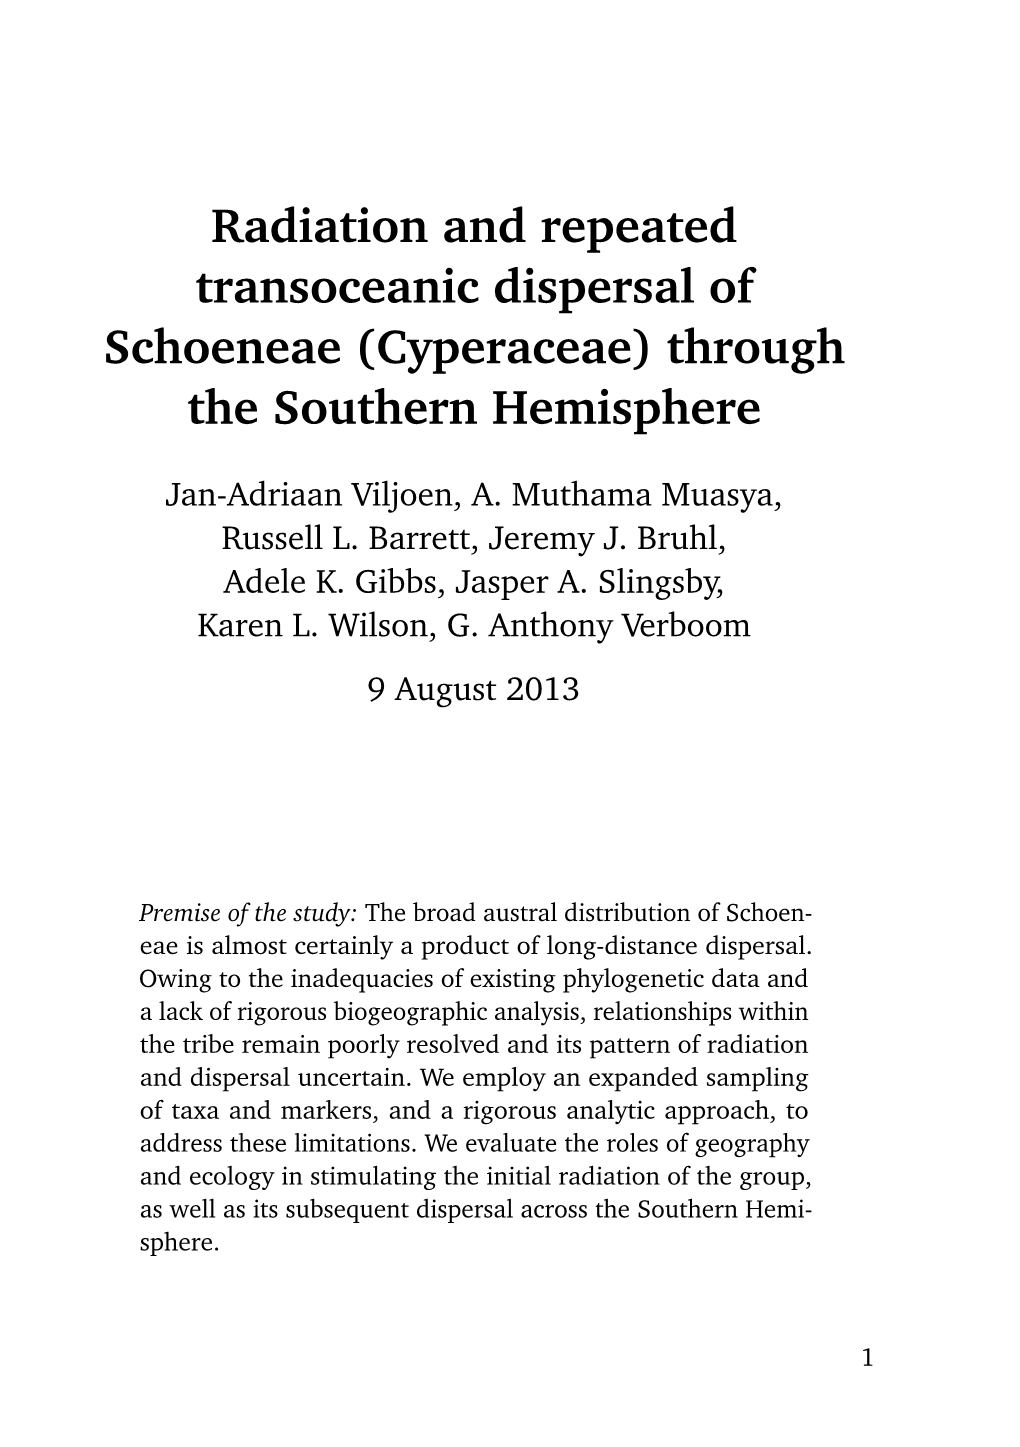 Radiation and Transoceanic Dispersal of the Schoenoid Sedges